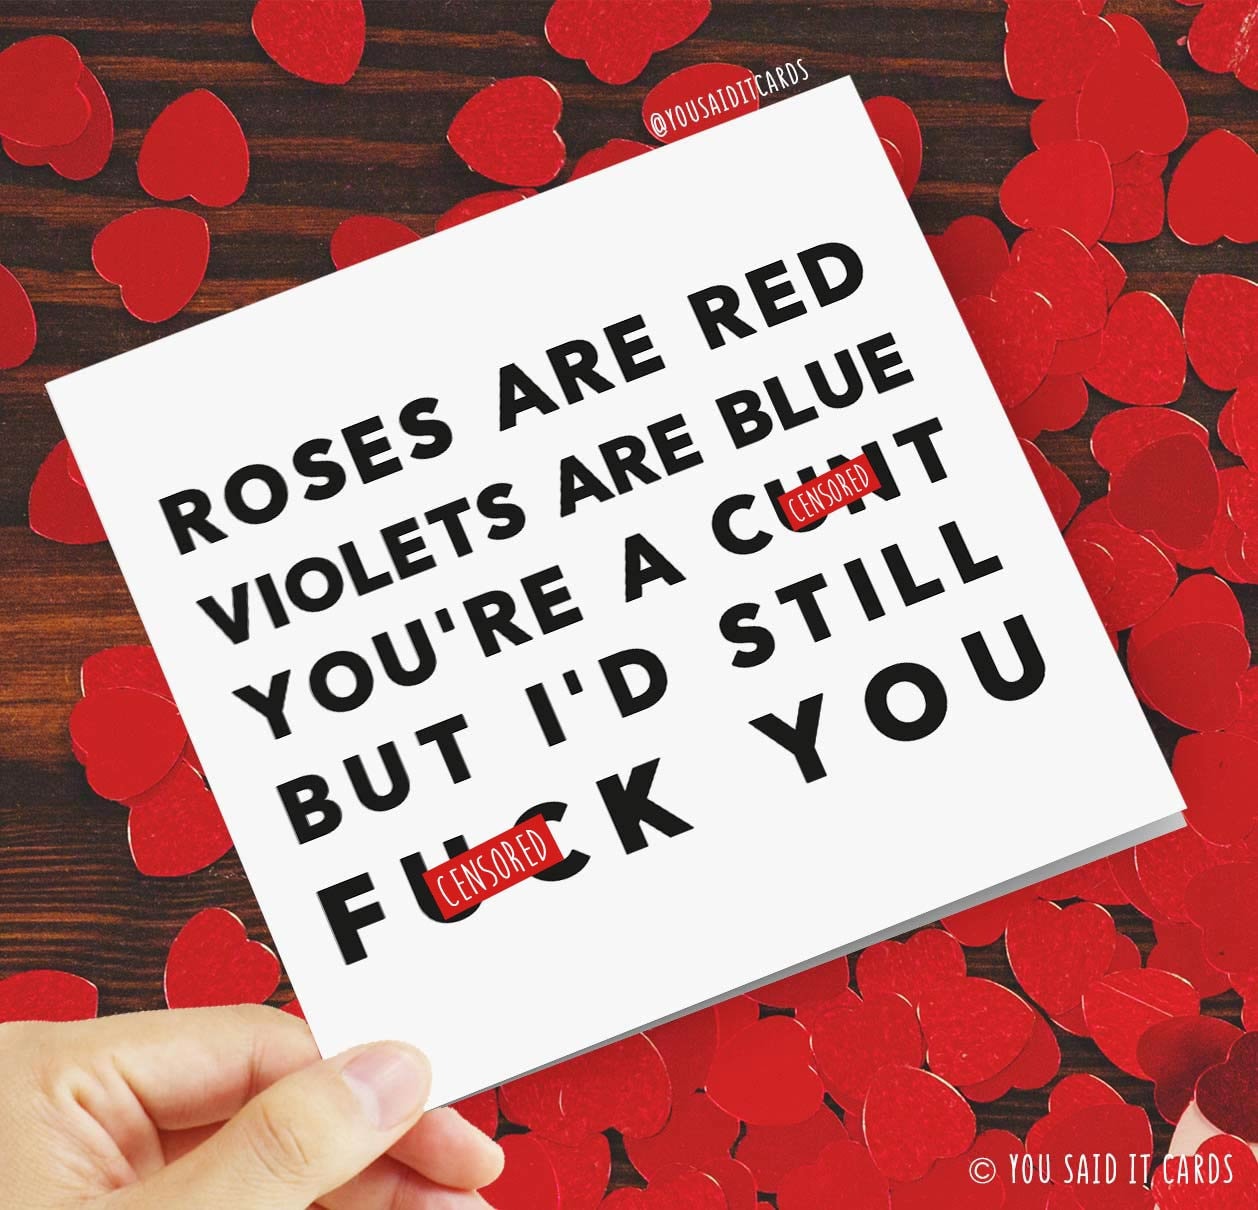 Roses Are Red Are Blue You're a Cunt I'd - Etsy